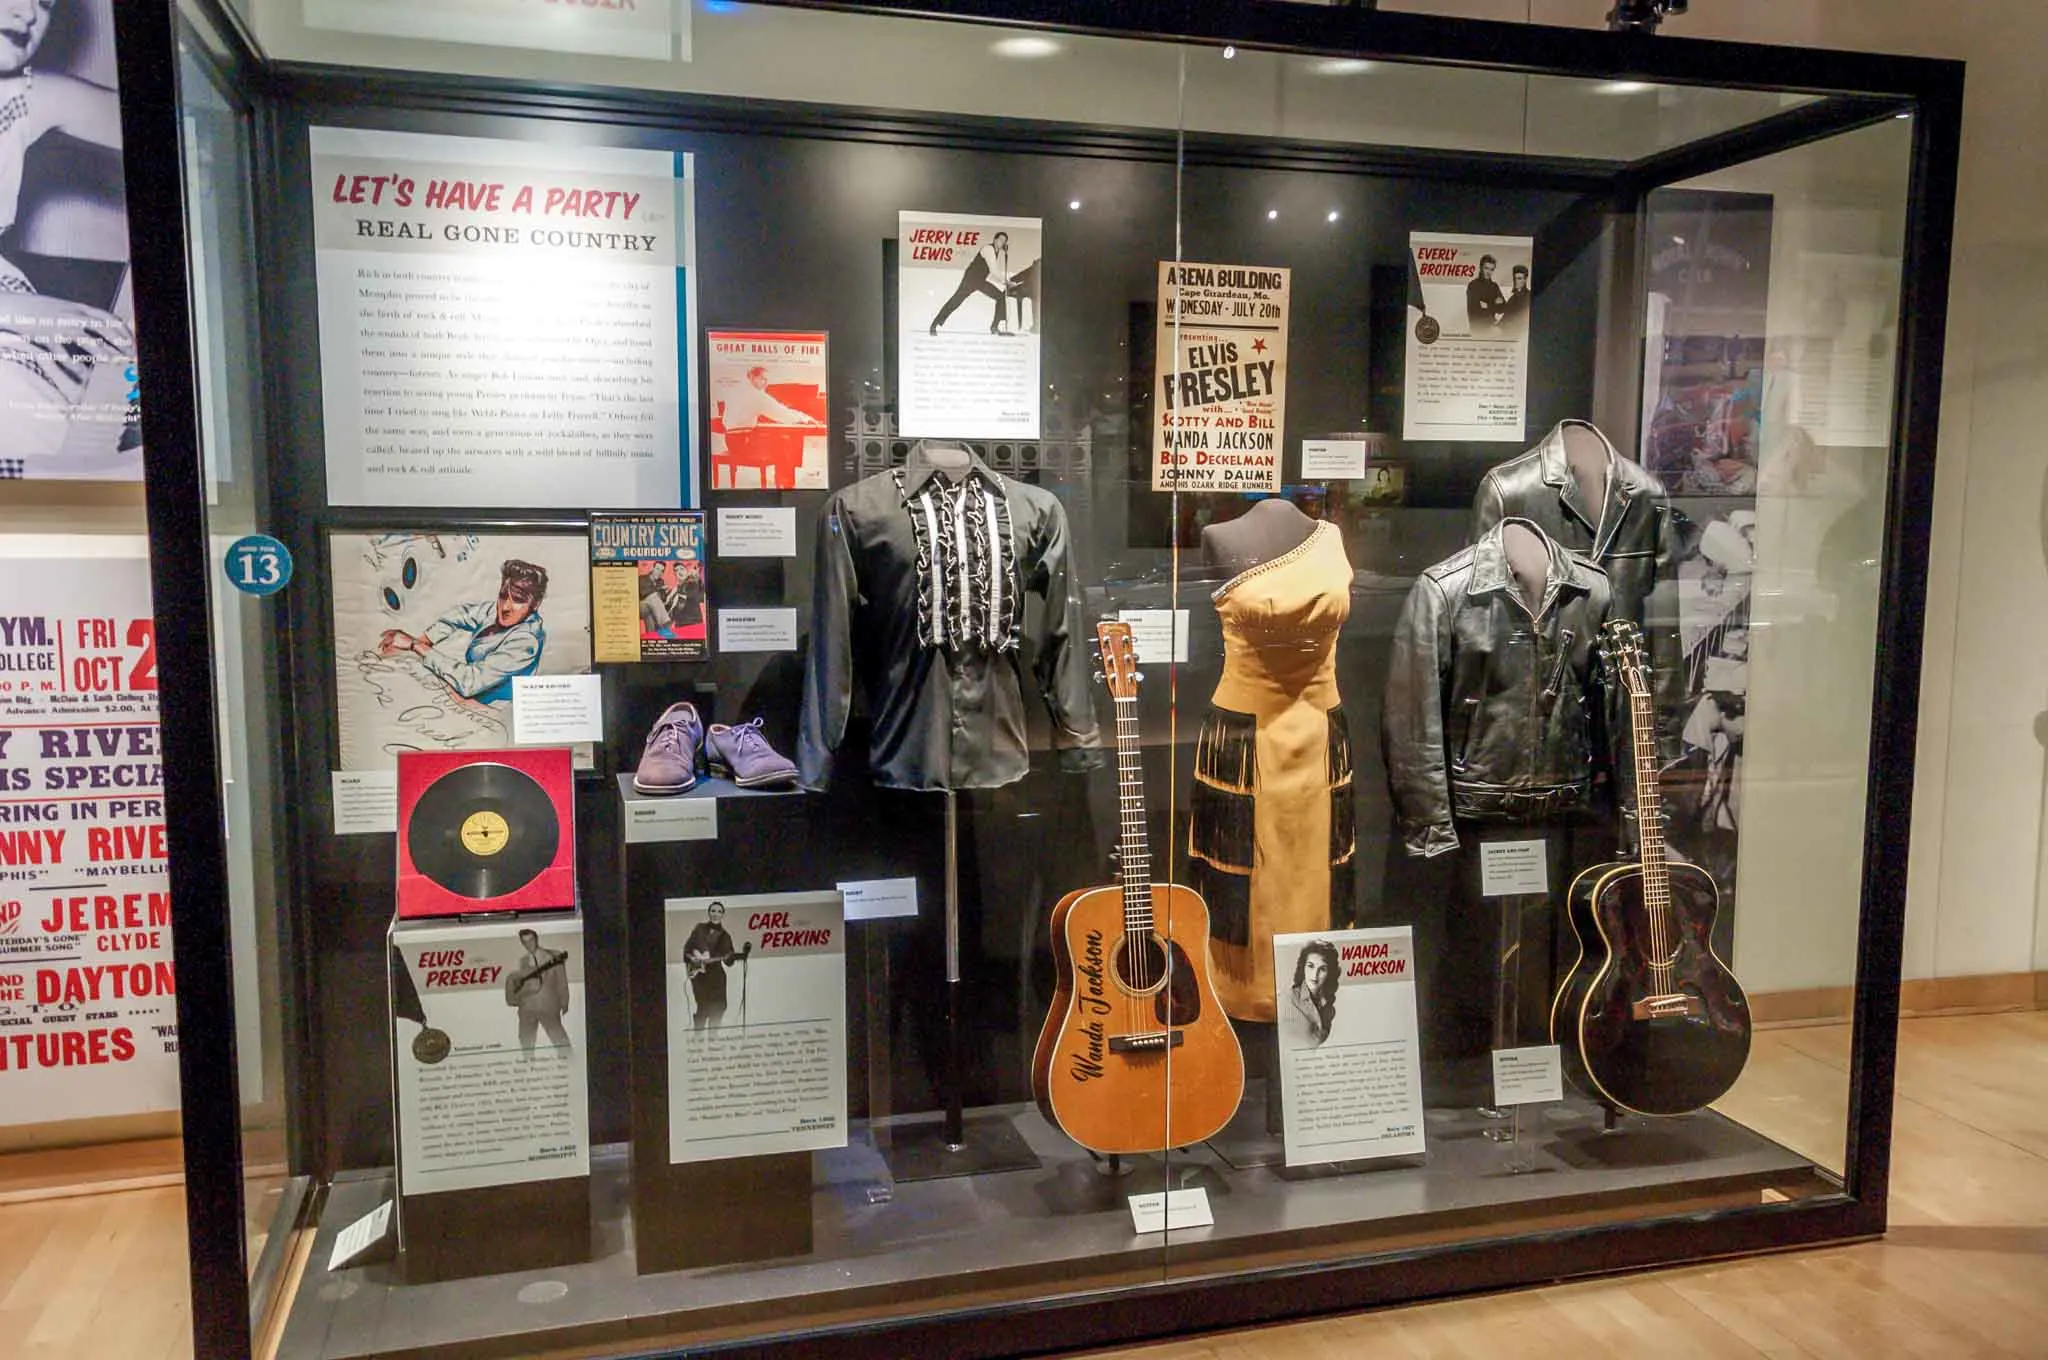 Museum display of records, guitars, and costumes 